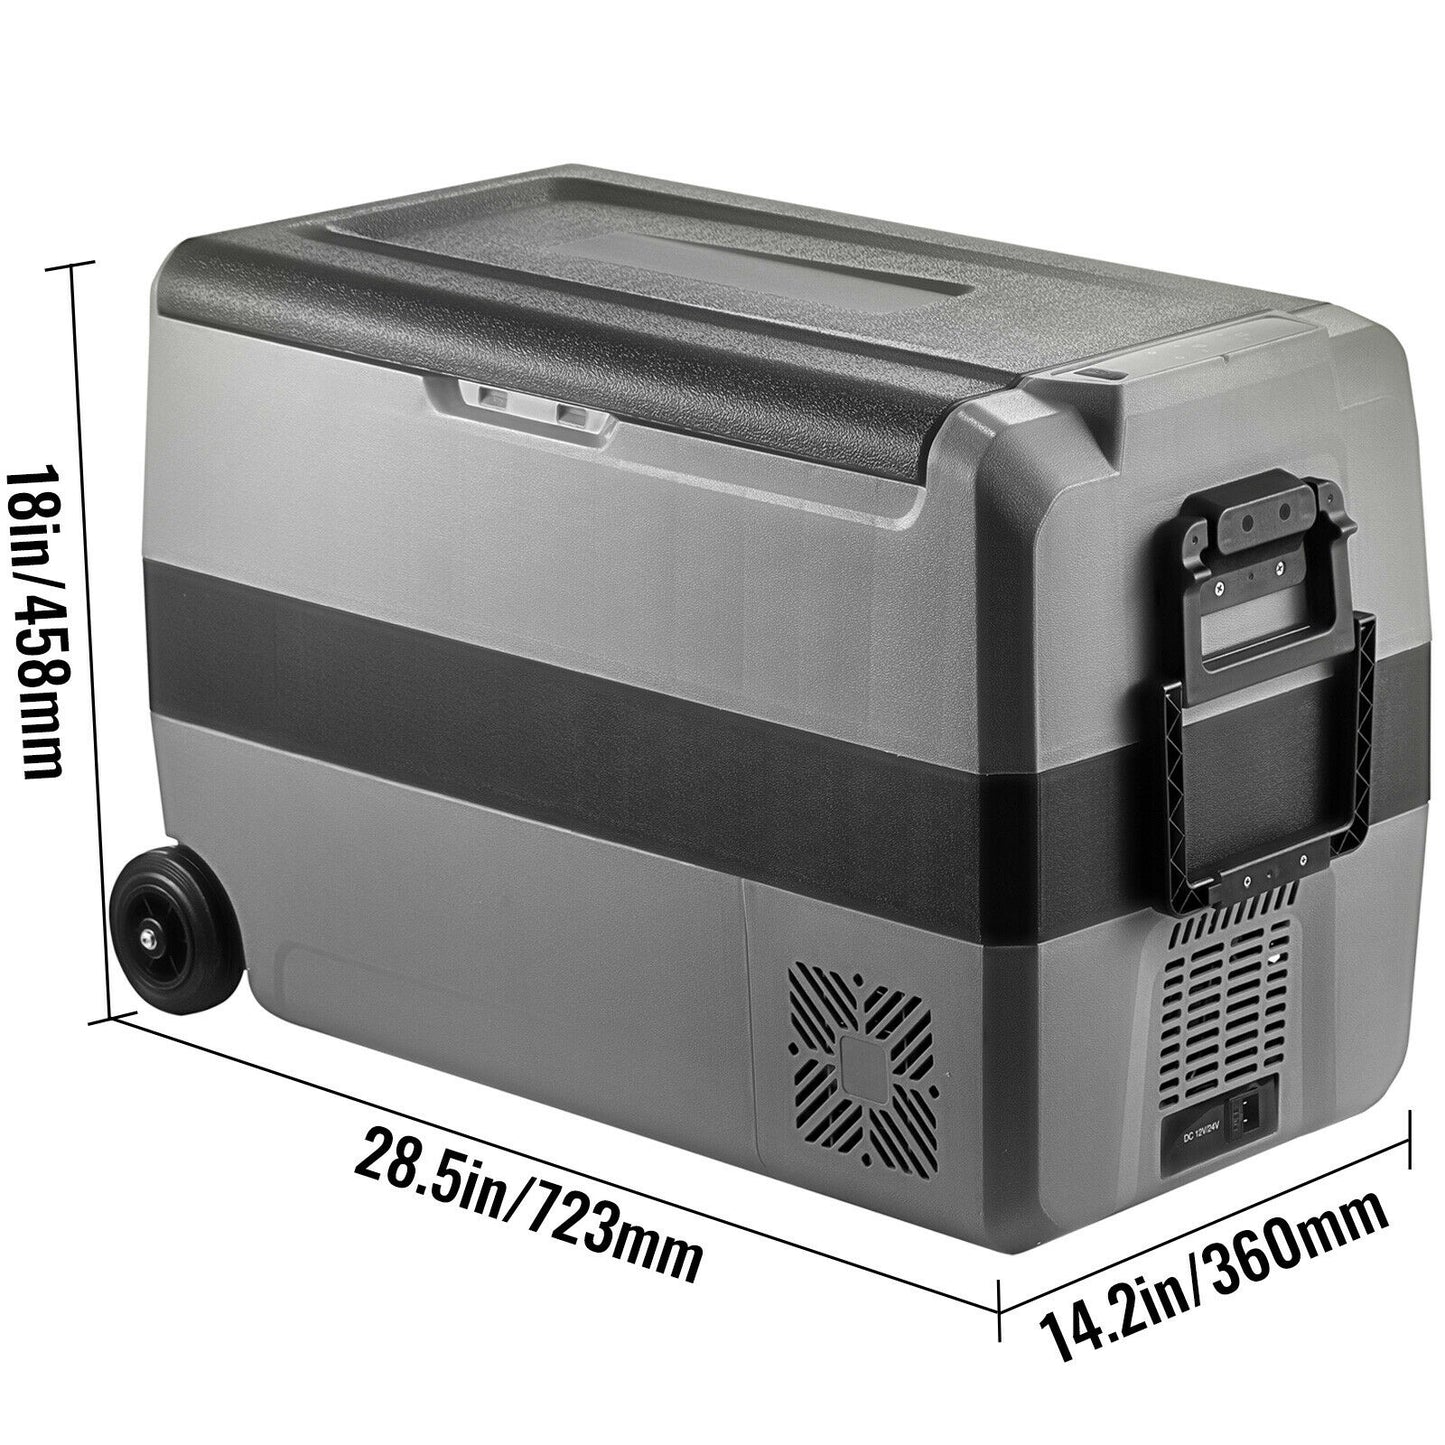 36L 50L 60L Portable Car Refrigerator Freezer With Wheels & Handle 12/24V DC 100-240 AC.  Great for RV Builds, Camping, Picnics